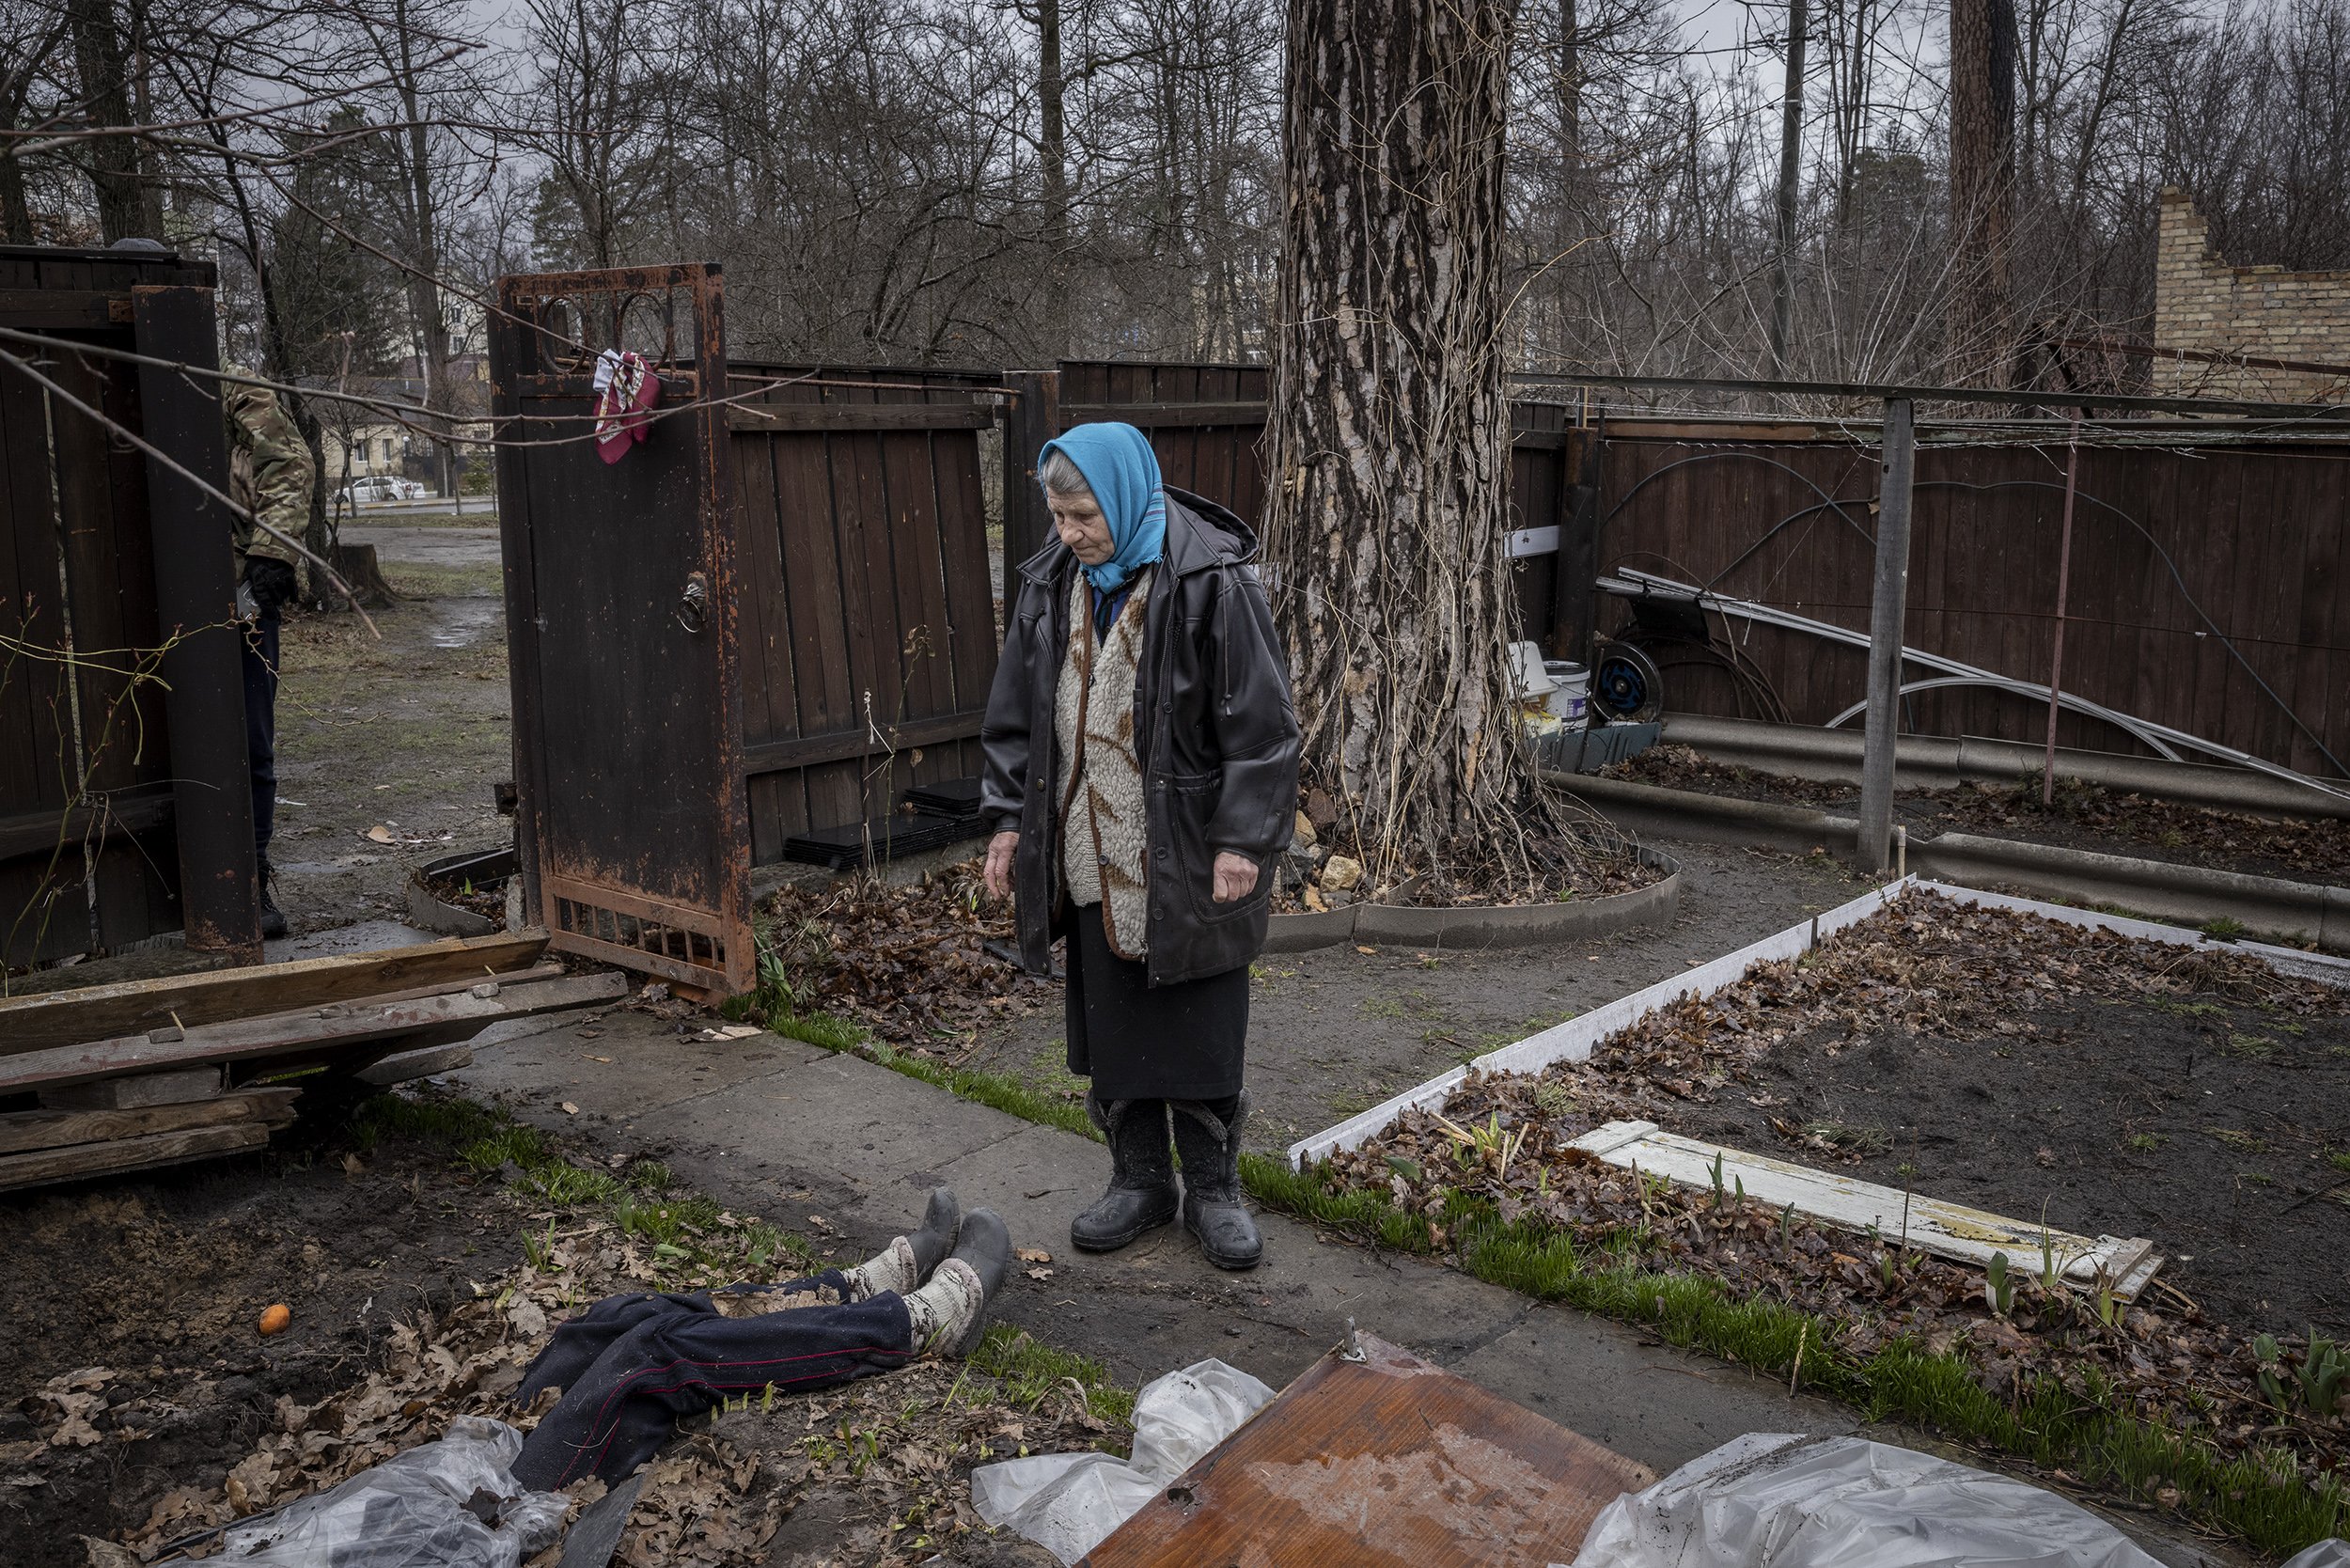  Antonina Pomazanko looked down at the half buried body of her daughter, Tetiana, which lay virtually where she had fallen after being shot by Russian forces when they entered Bucha on the 27th of February. Antonina had dug the shallow grave herself 